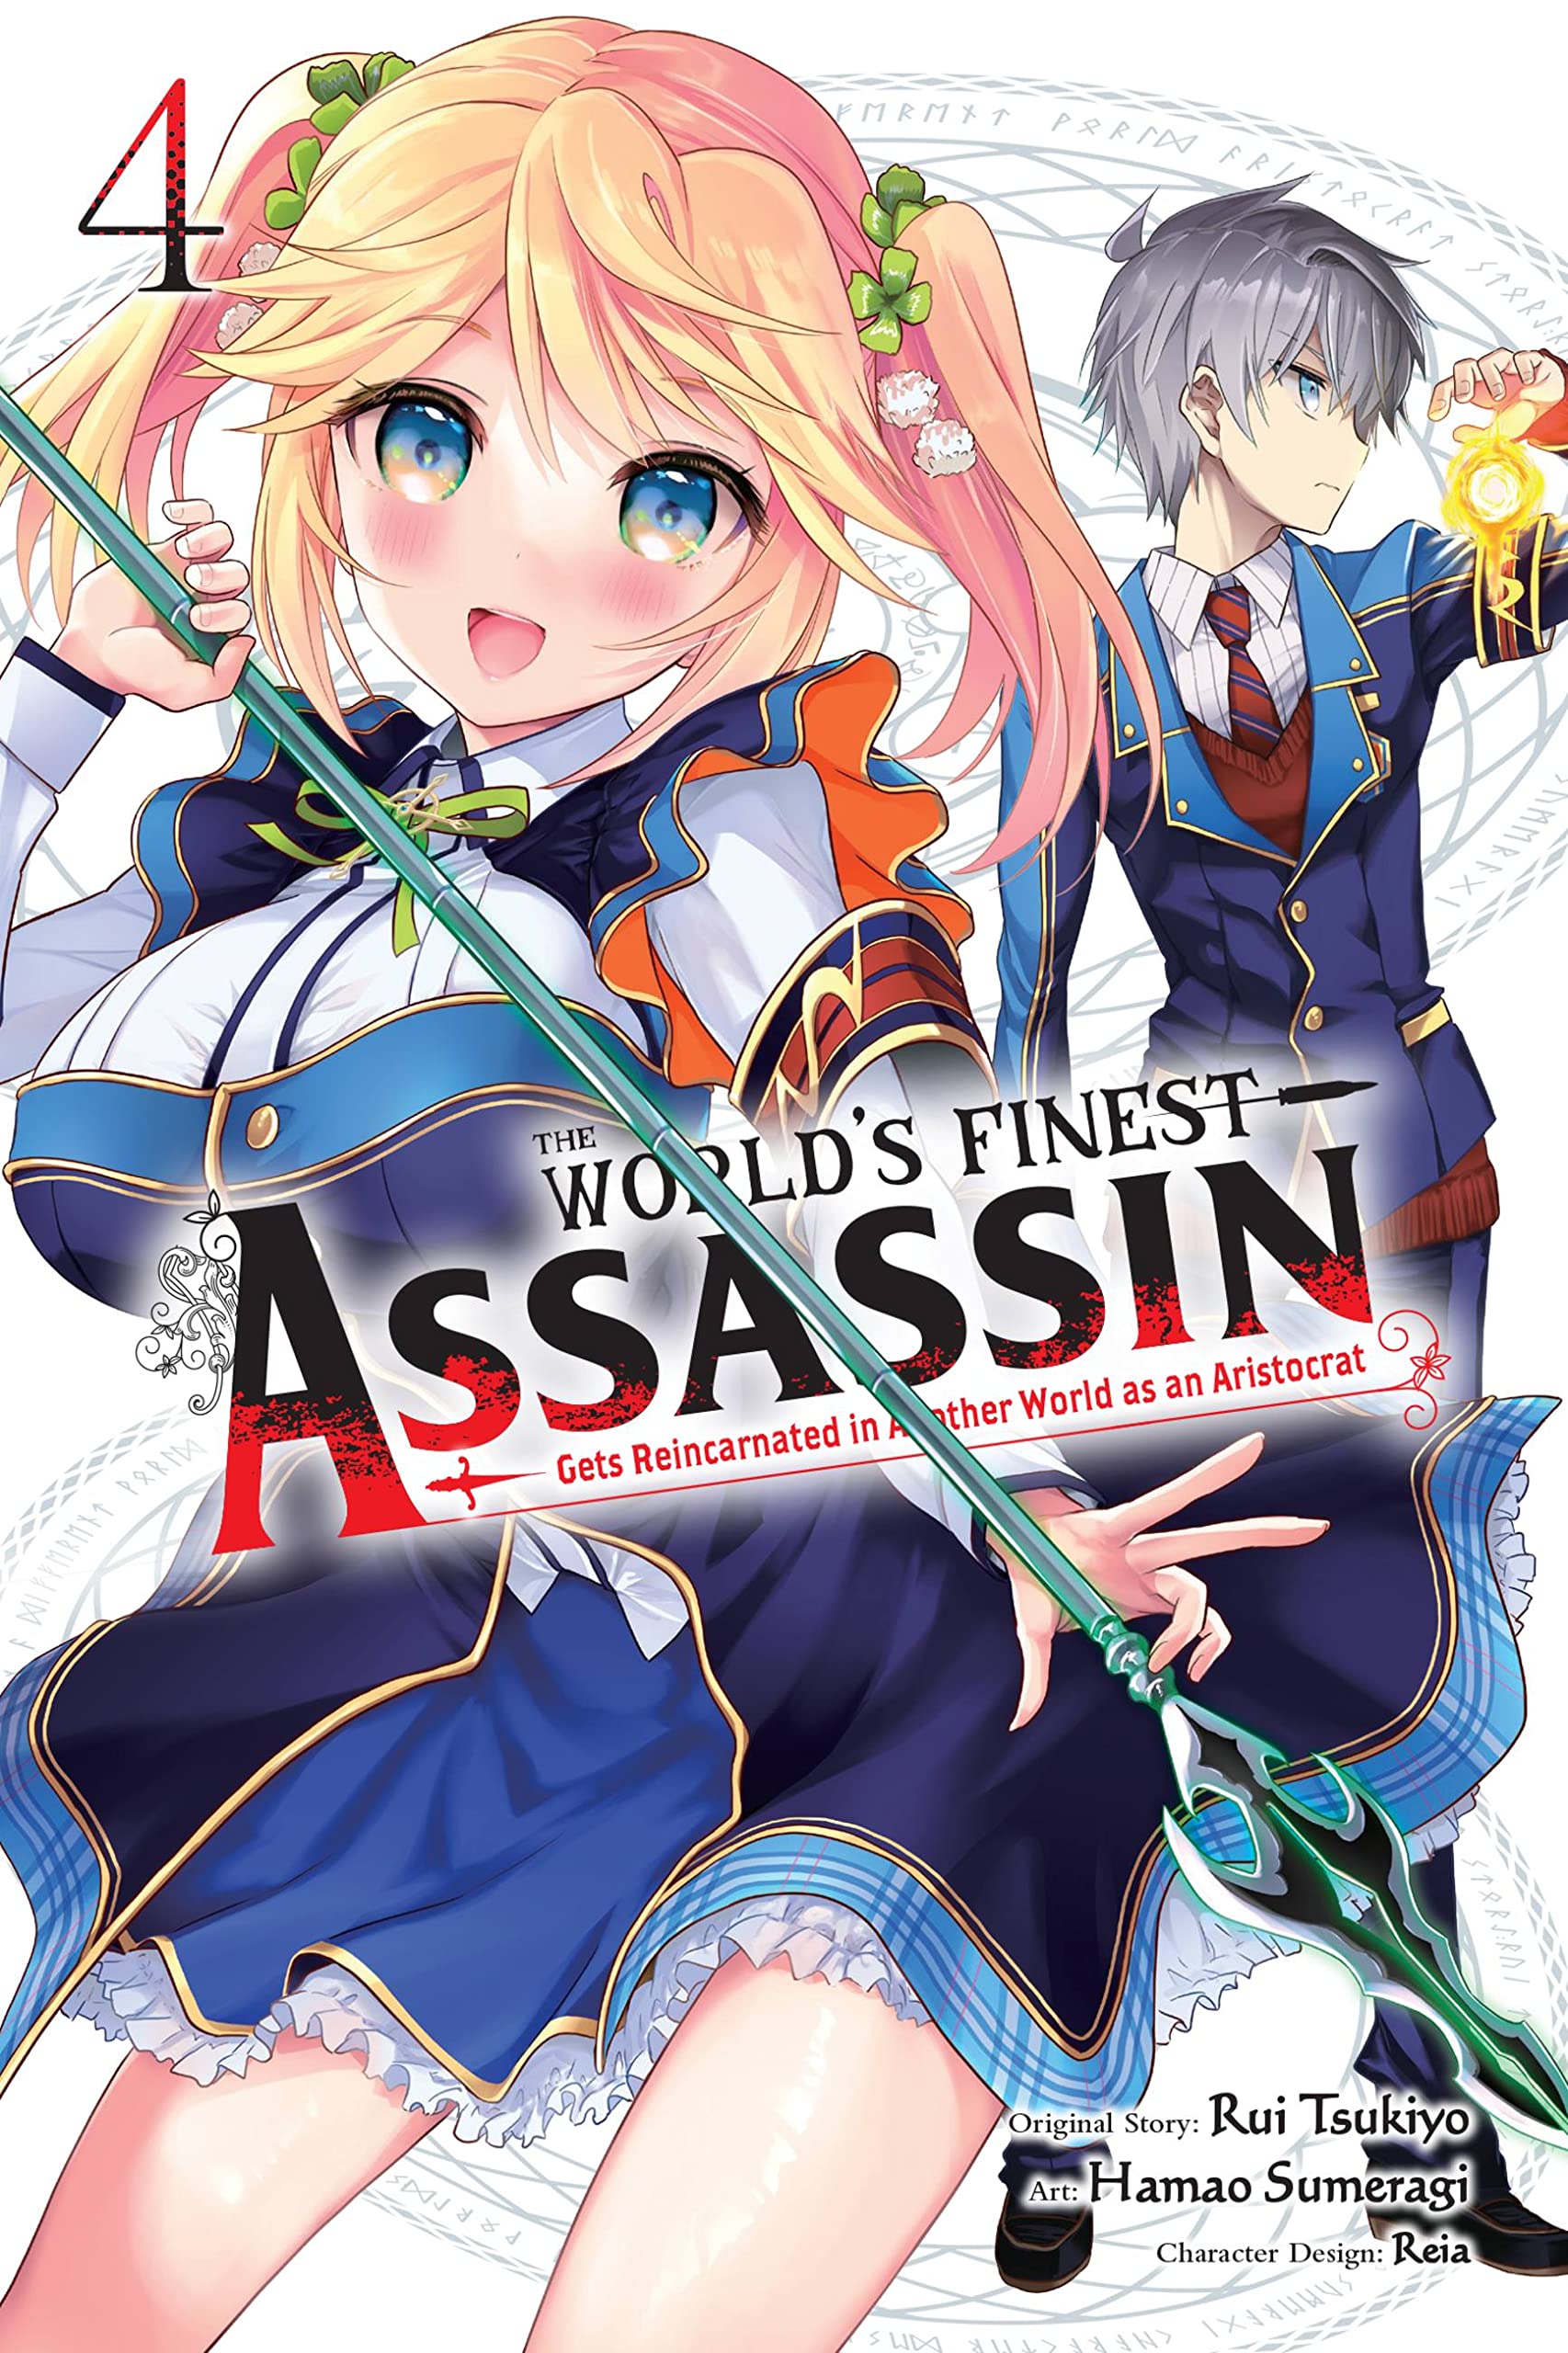 The World's Finest Assassin Gets Reincarnated in Another World as an Aristocrat (Manga) Vol. 04